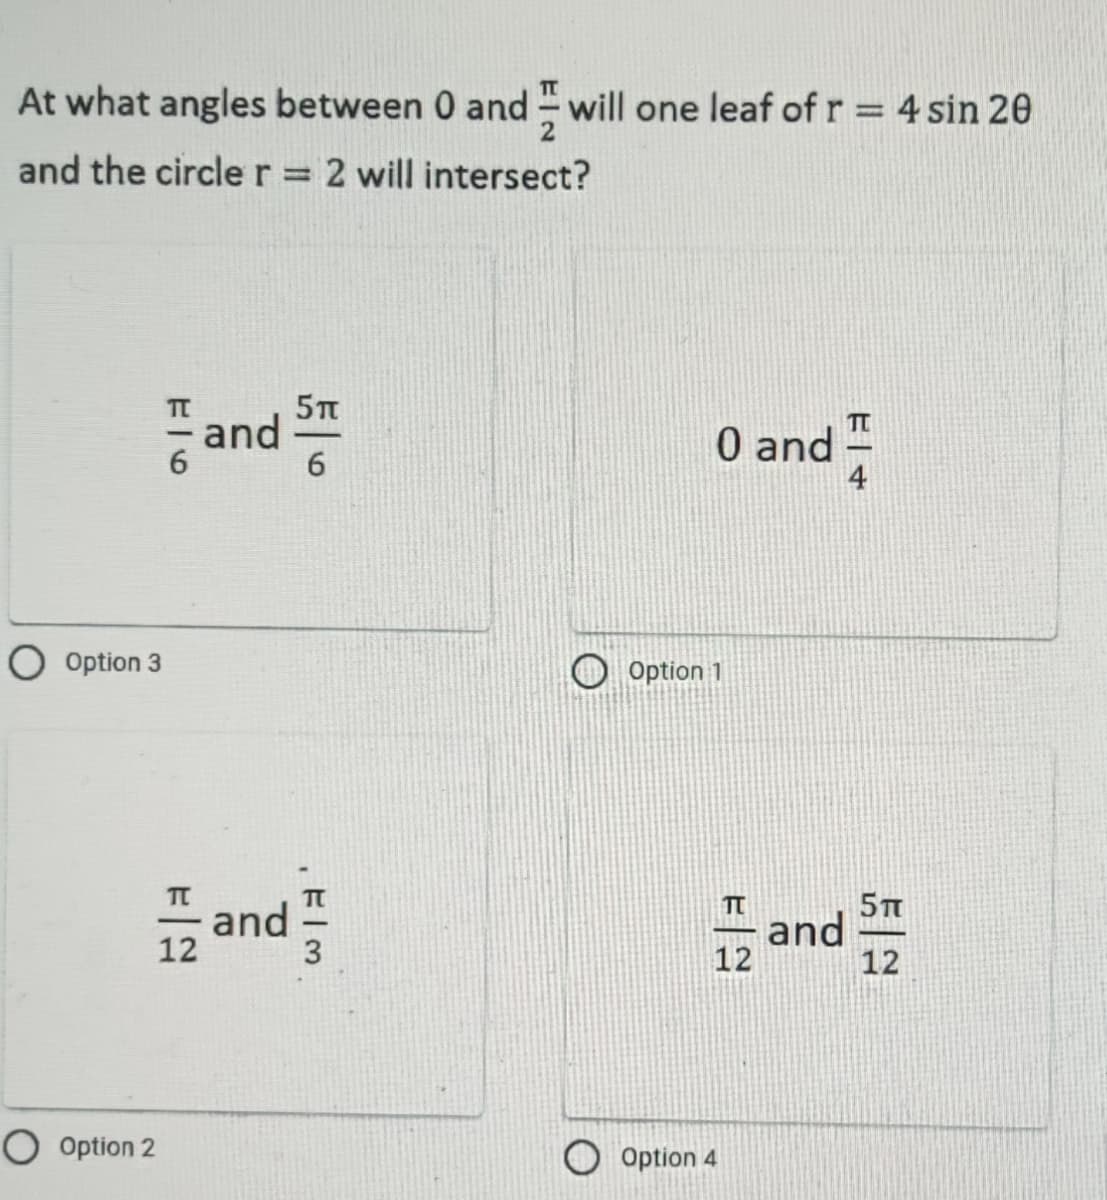 At what angles between 0 and will one leaf of r = 4 sin 20
and the circle r = 2 will intersect?
5п
0 and
6
O Option 3
Option 2
F6
| 12
and
and
. Elm
Option 1
TT
and
12
Option 4
FI+
TT
4
5T
12